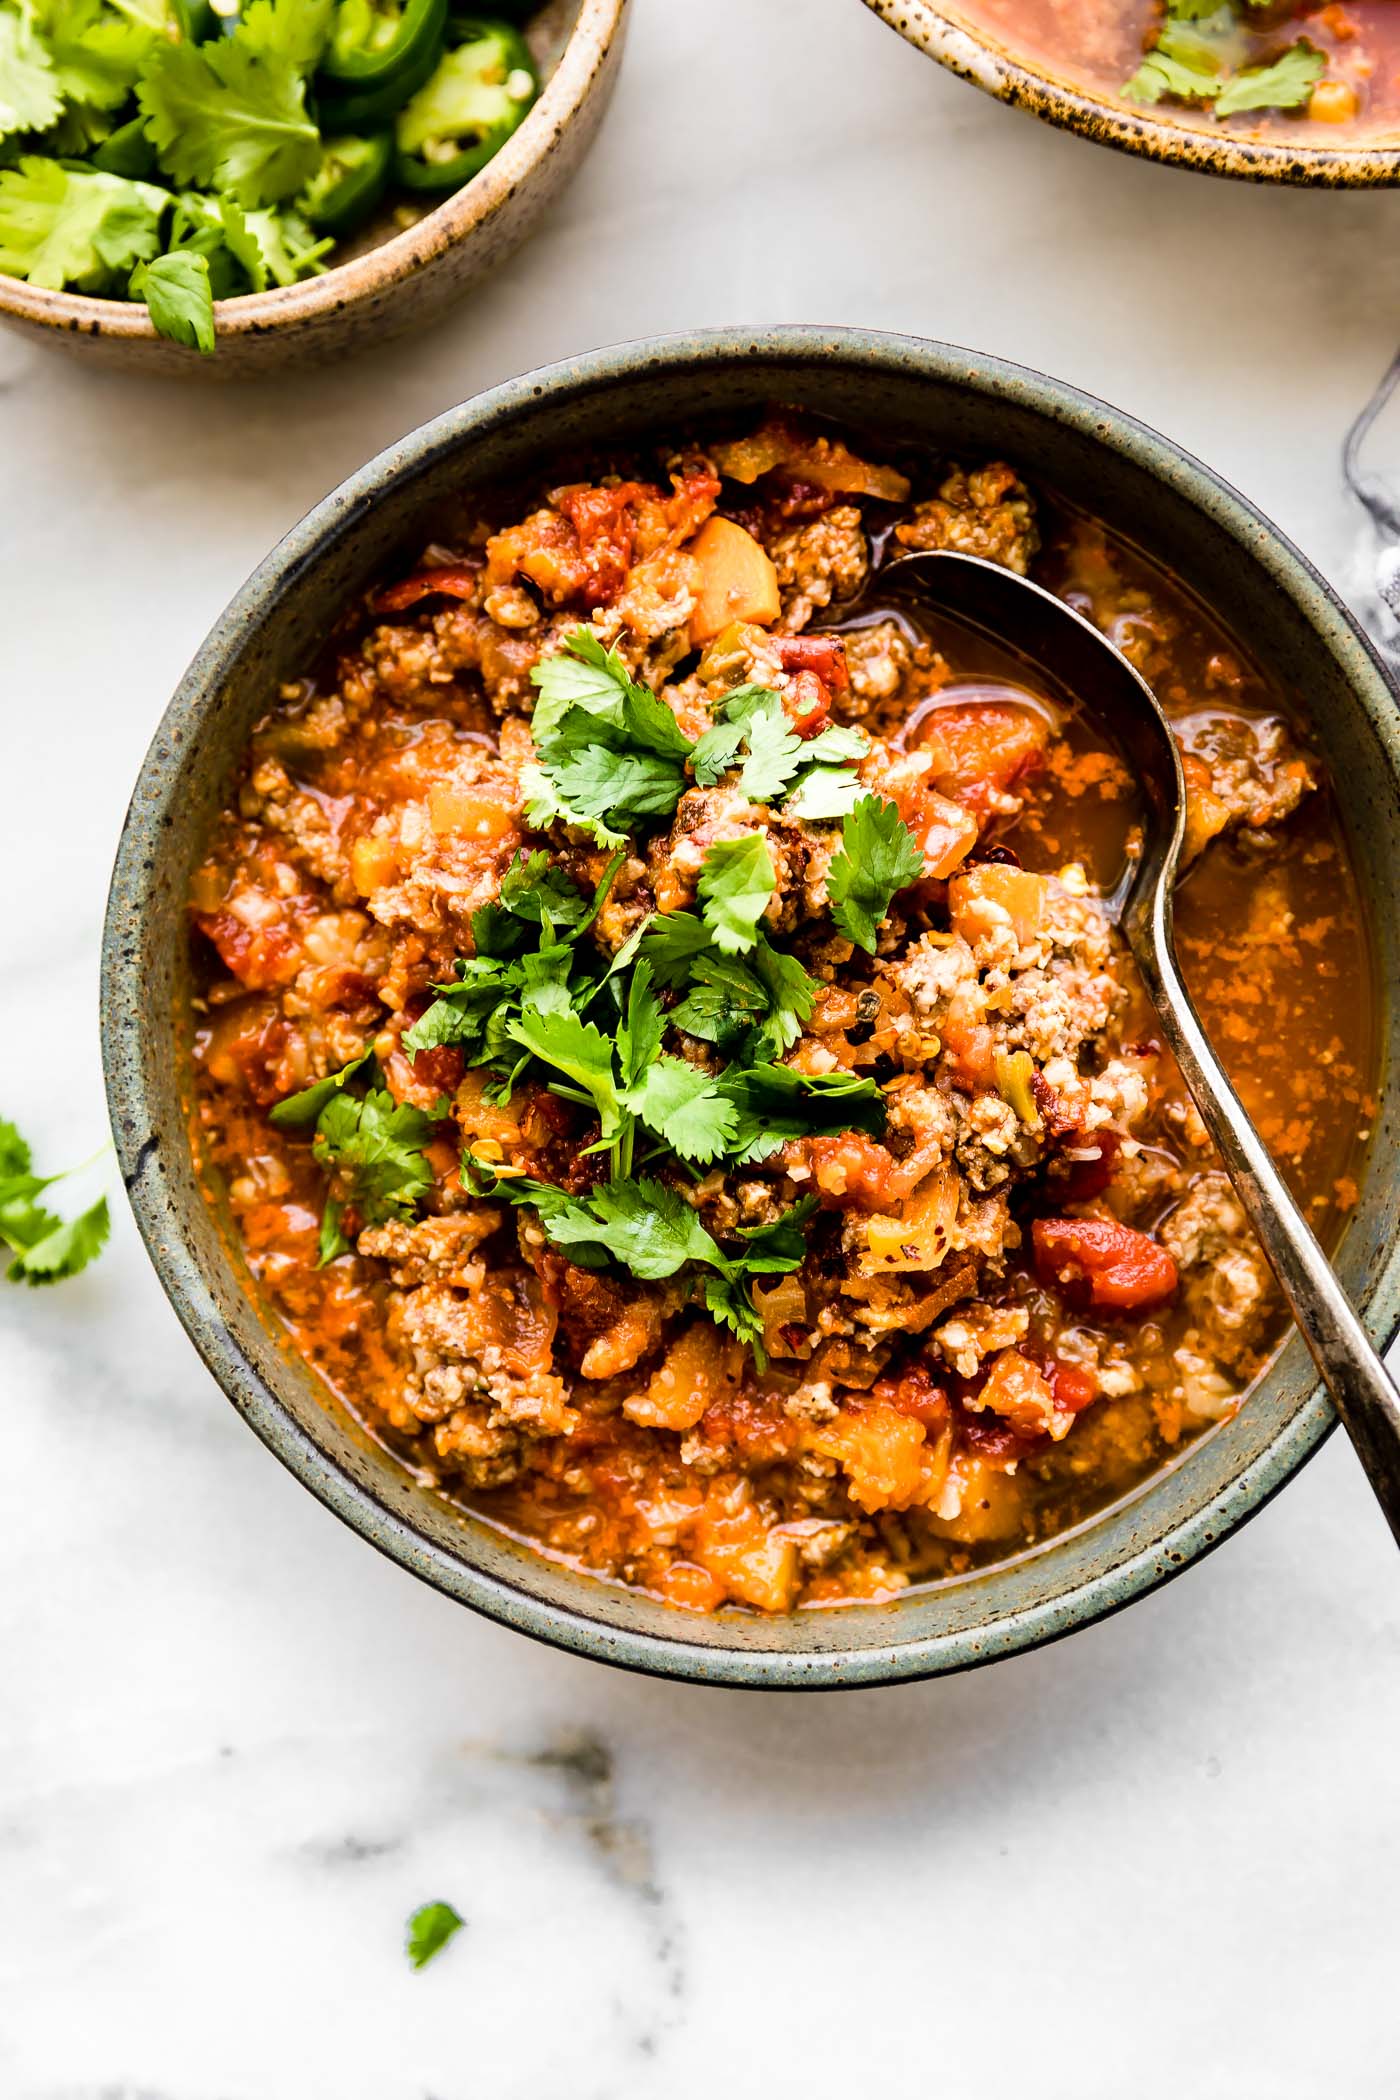 Crock Pot Paleo Sweet Potato Chipotle Chili! This beanless chipotle chili recipe is healthy but hearty, with an extra kick of spice! Made with simple ingredients you probably already have in your fridge! An easy whole 30 and paleo friendly chili made in the crock pot so you can be ready to serve with little effort. 